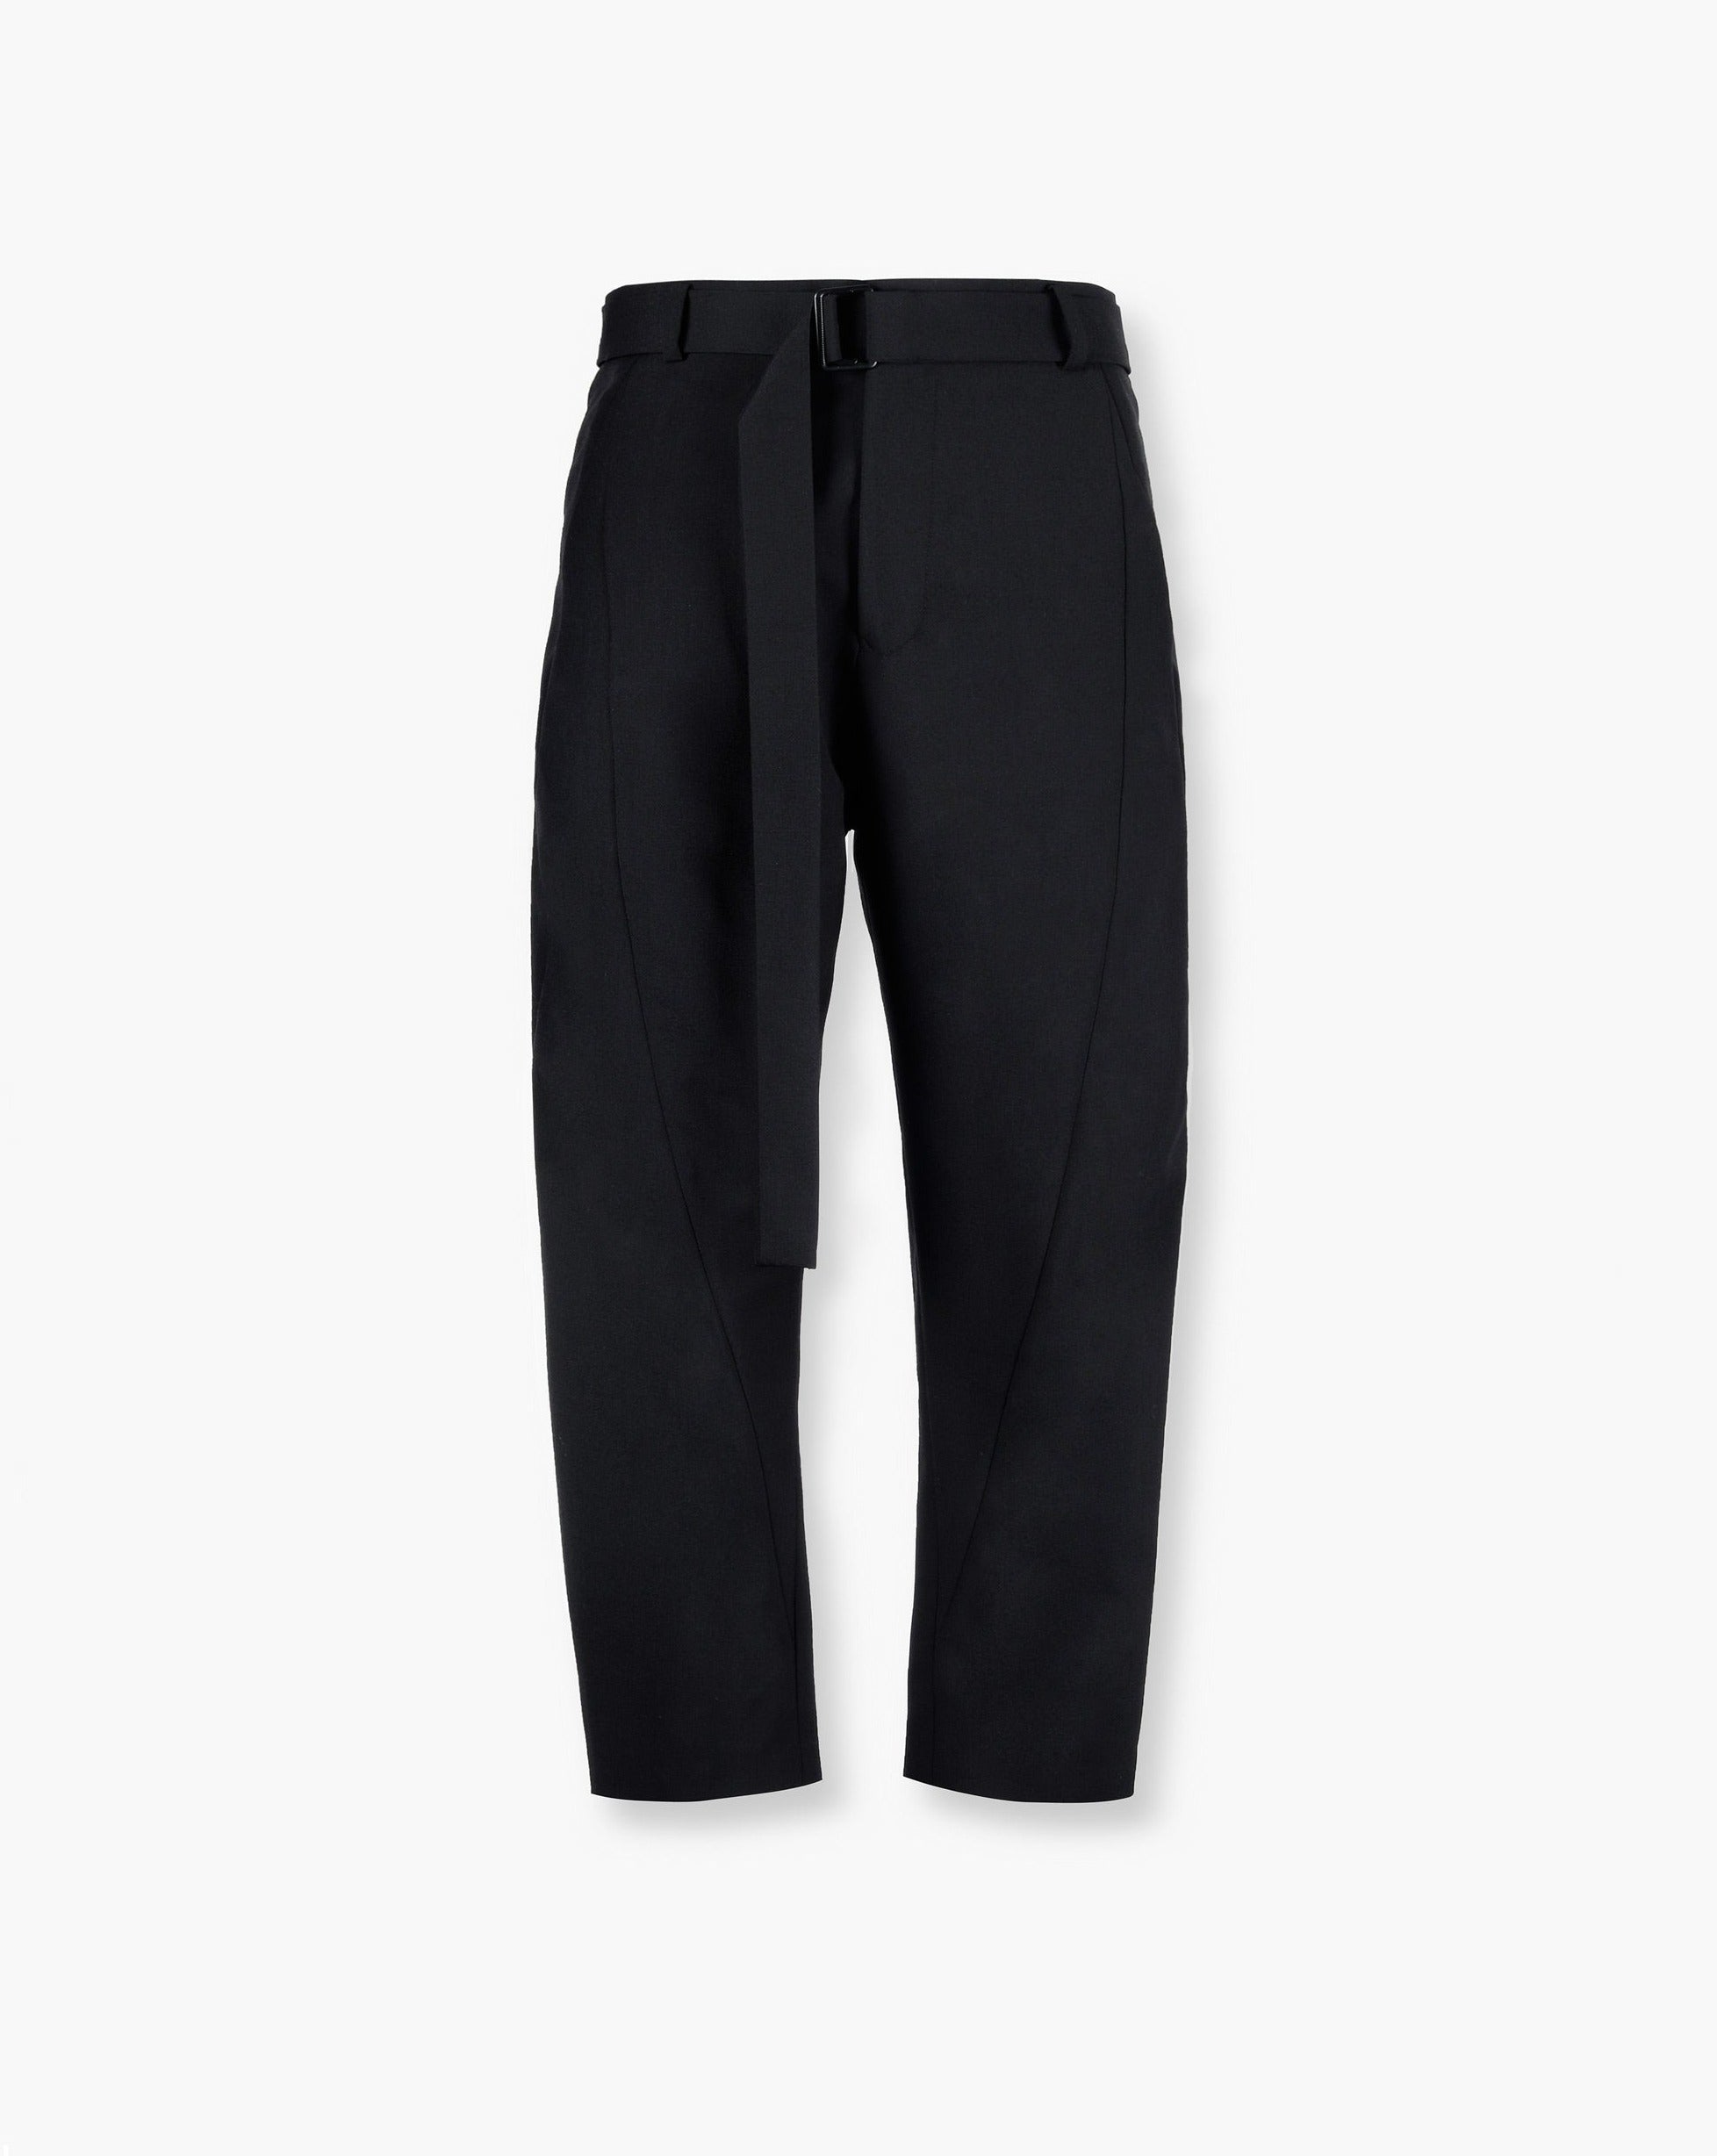 ROSEN Amdo Buckled Suit Trousers